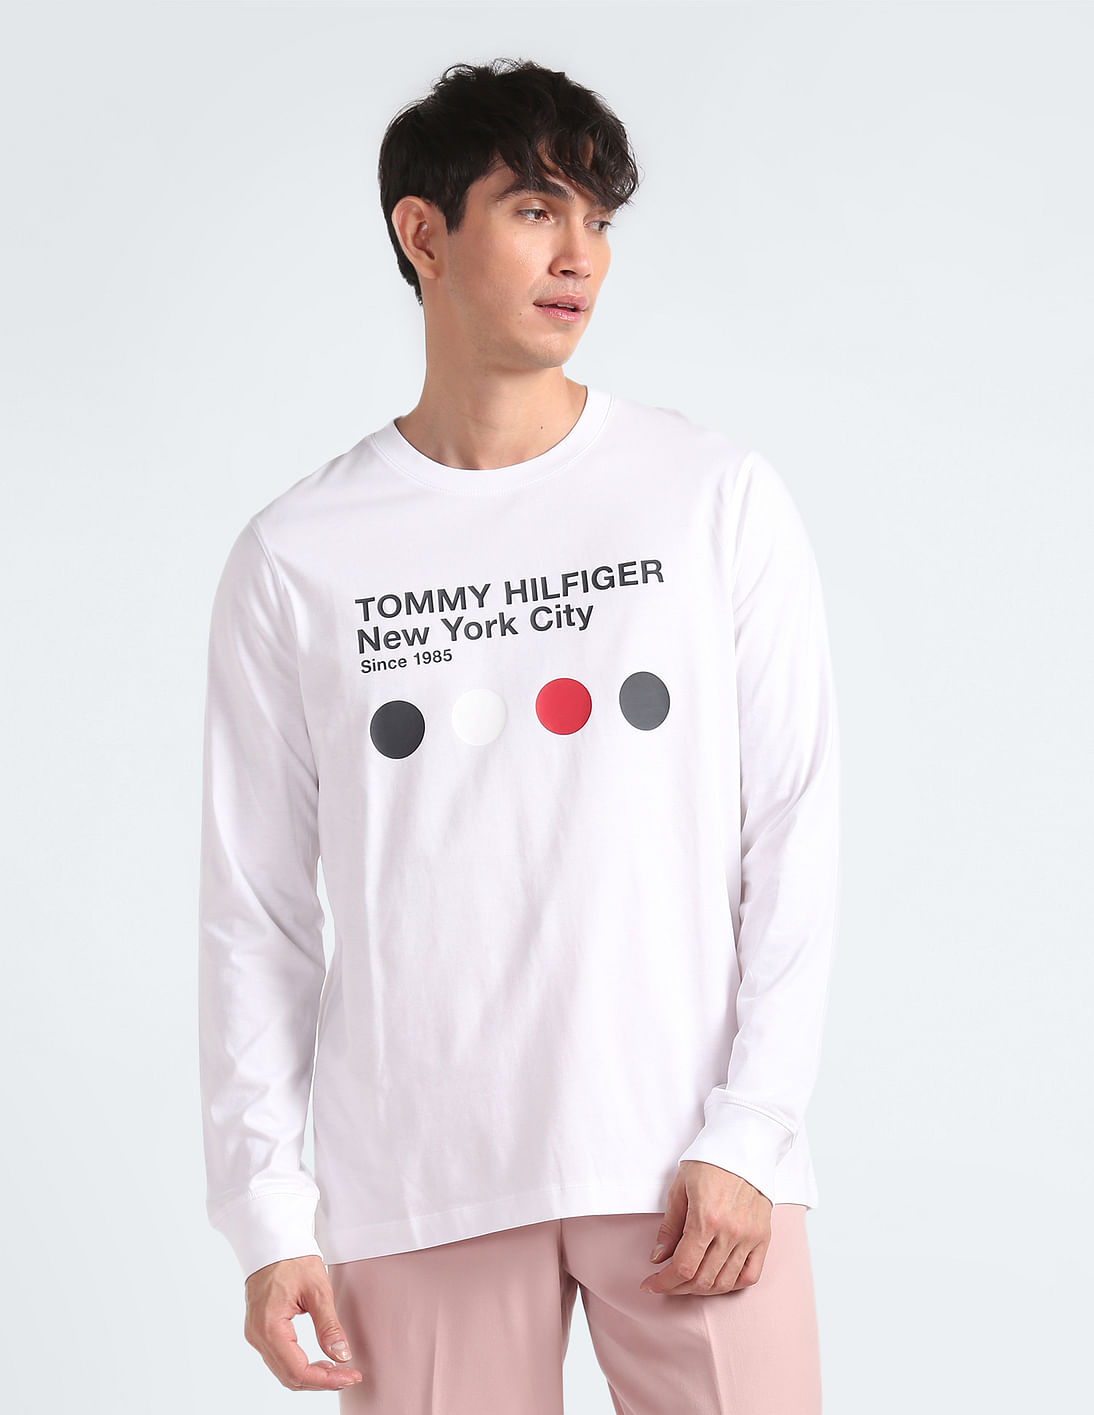 Buy Tommy Hilfiger Print Long Sleeve T-Shirt Typographic